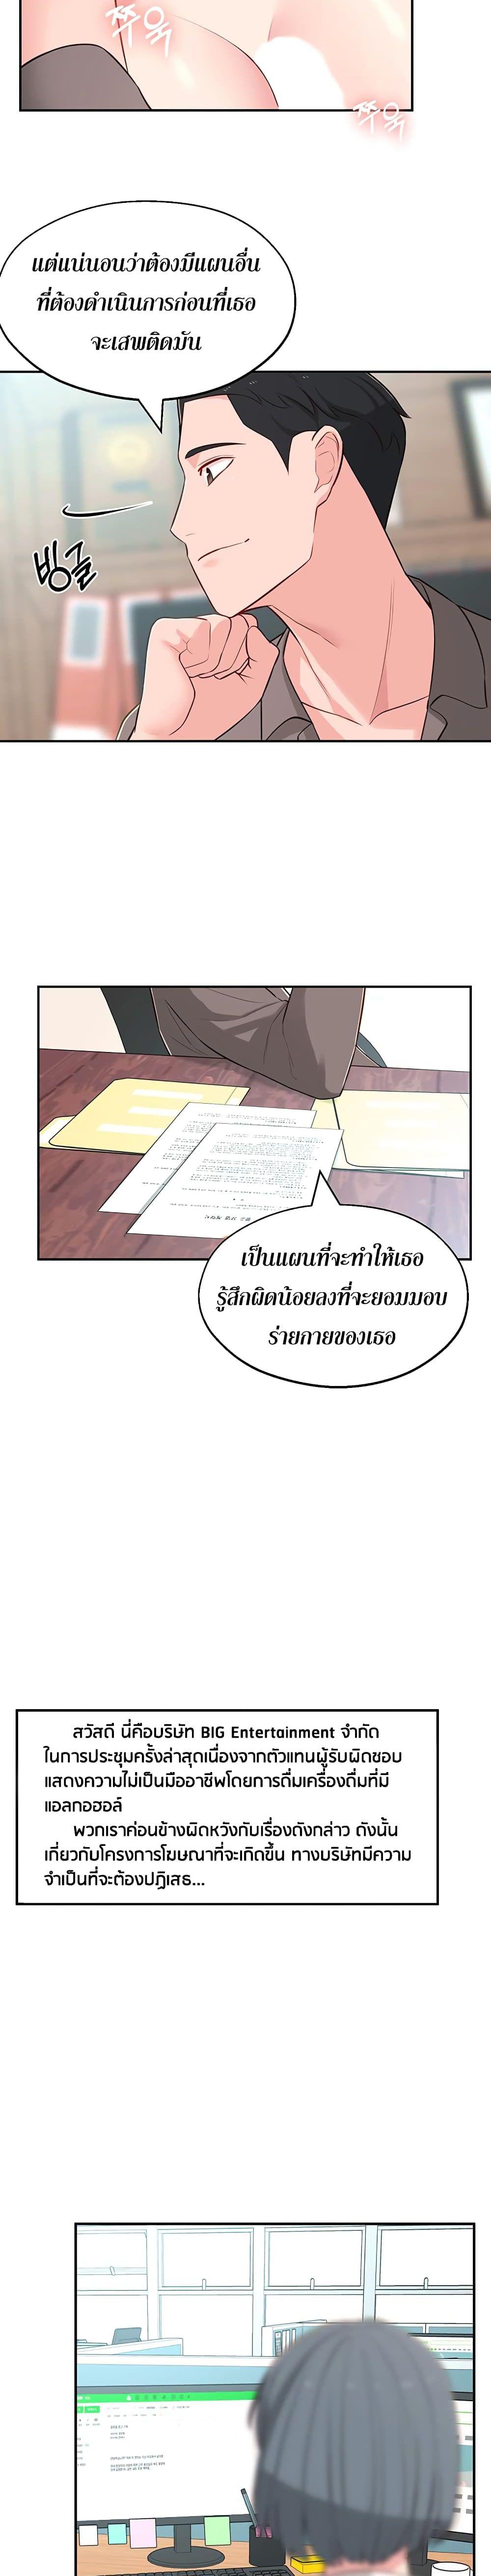 A Knowing Sister 12 ภาพ 20